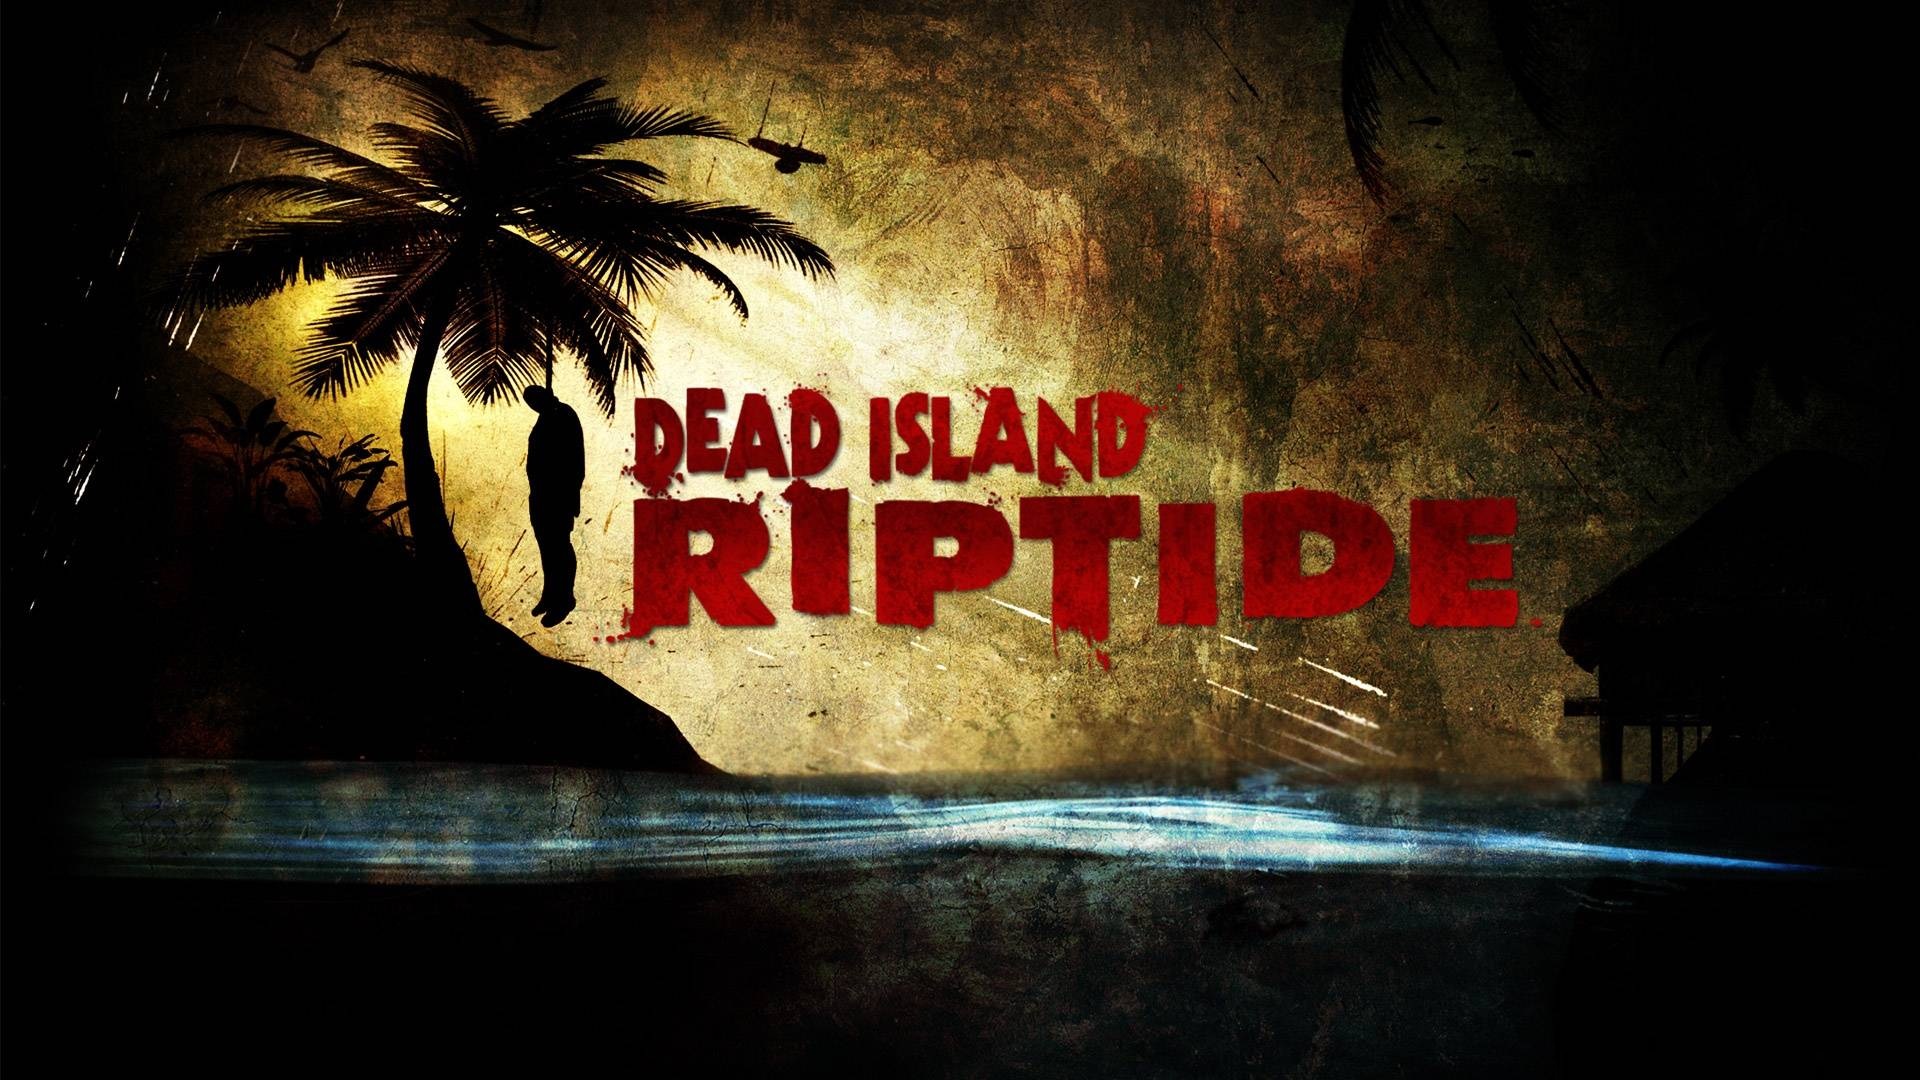 Dead Island: Riptide is now available for free on Steam